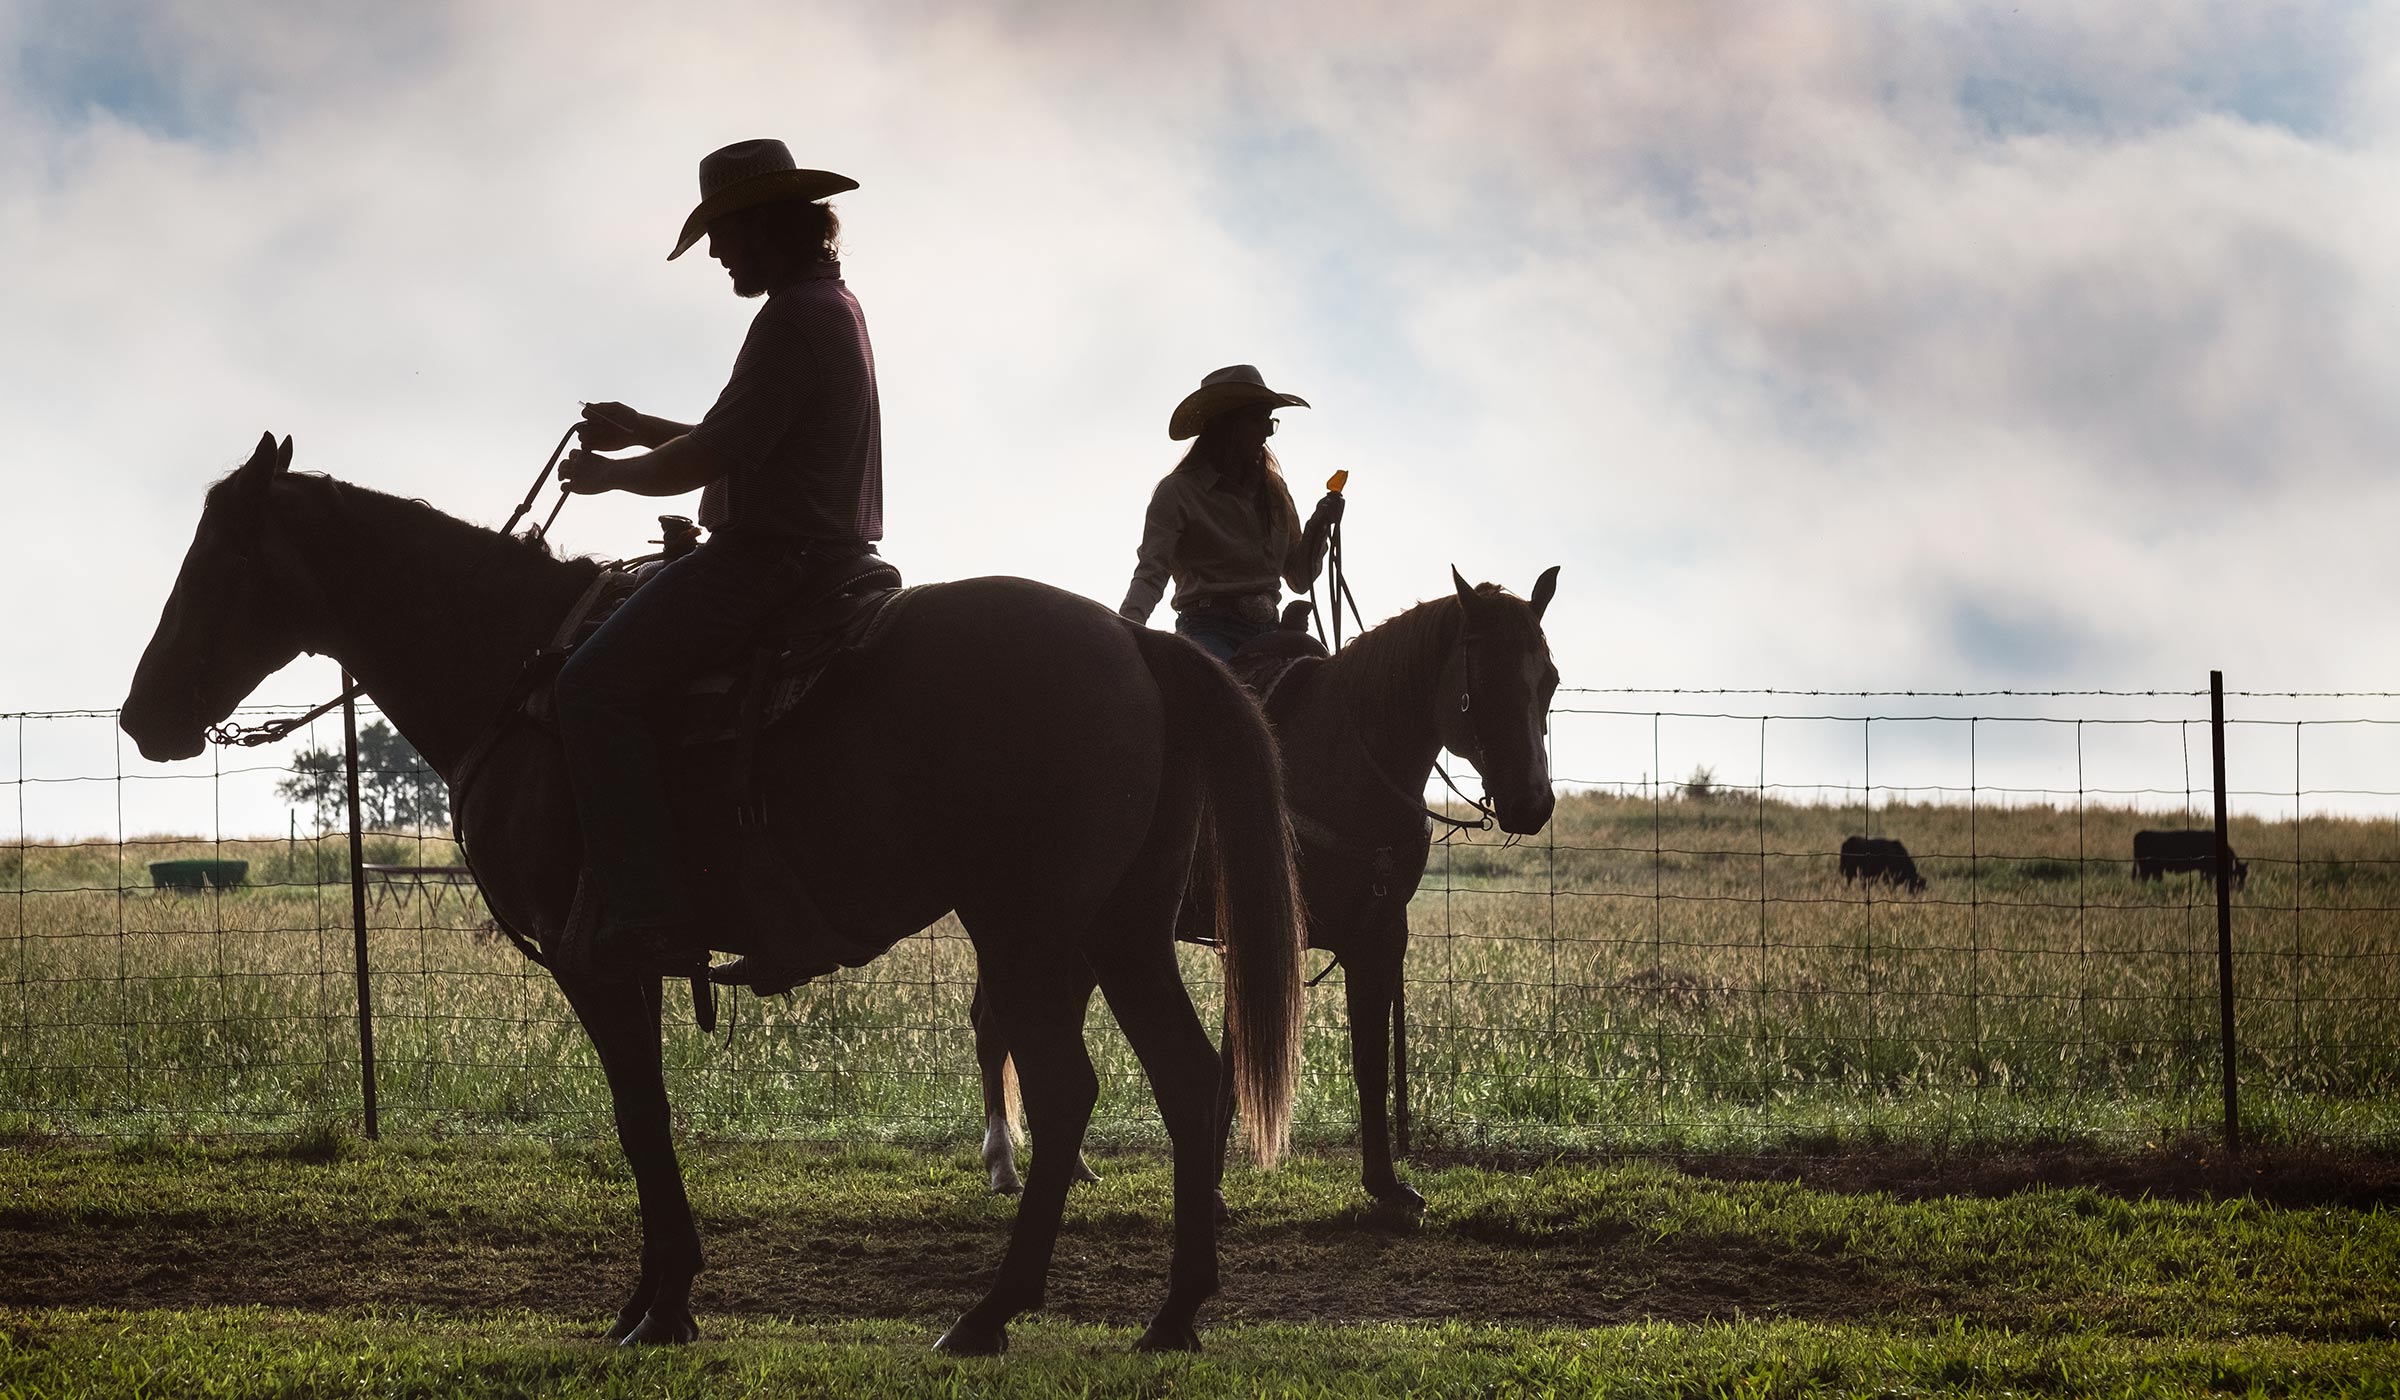 Two South Farm cowboys on their horses, in sillhouette, with cow pasture behind.